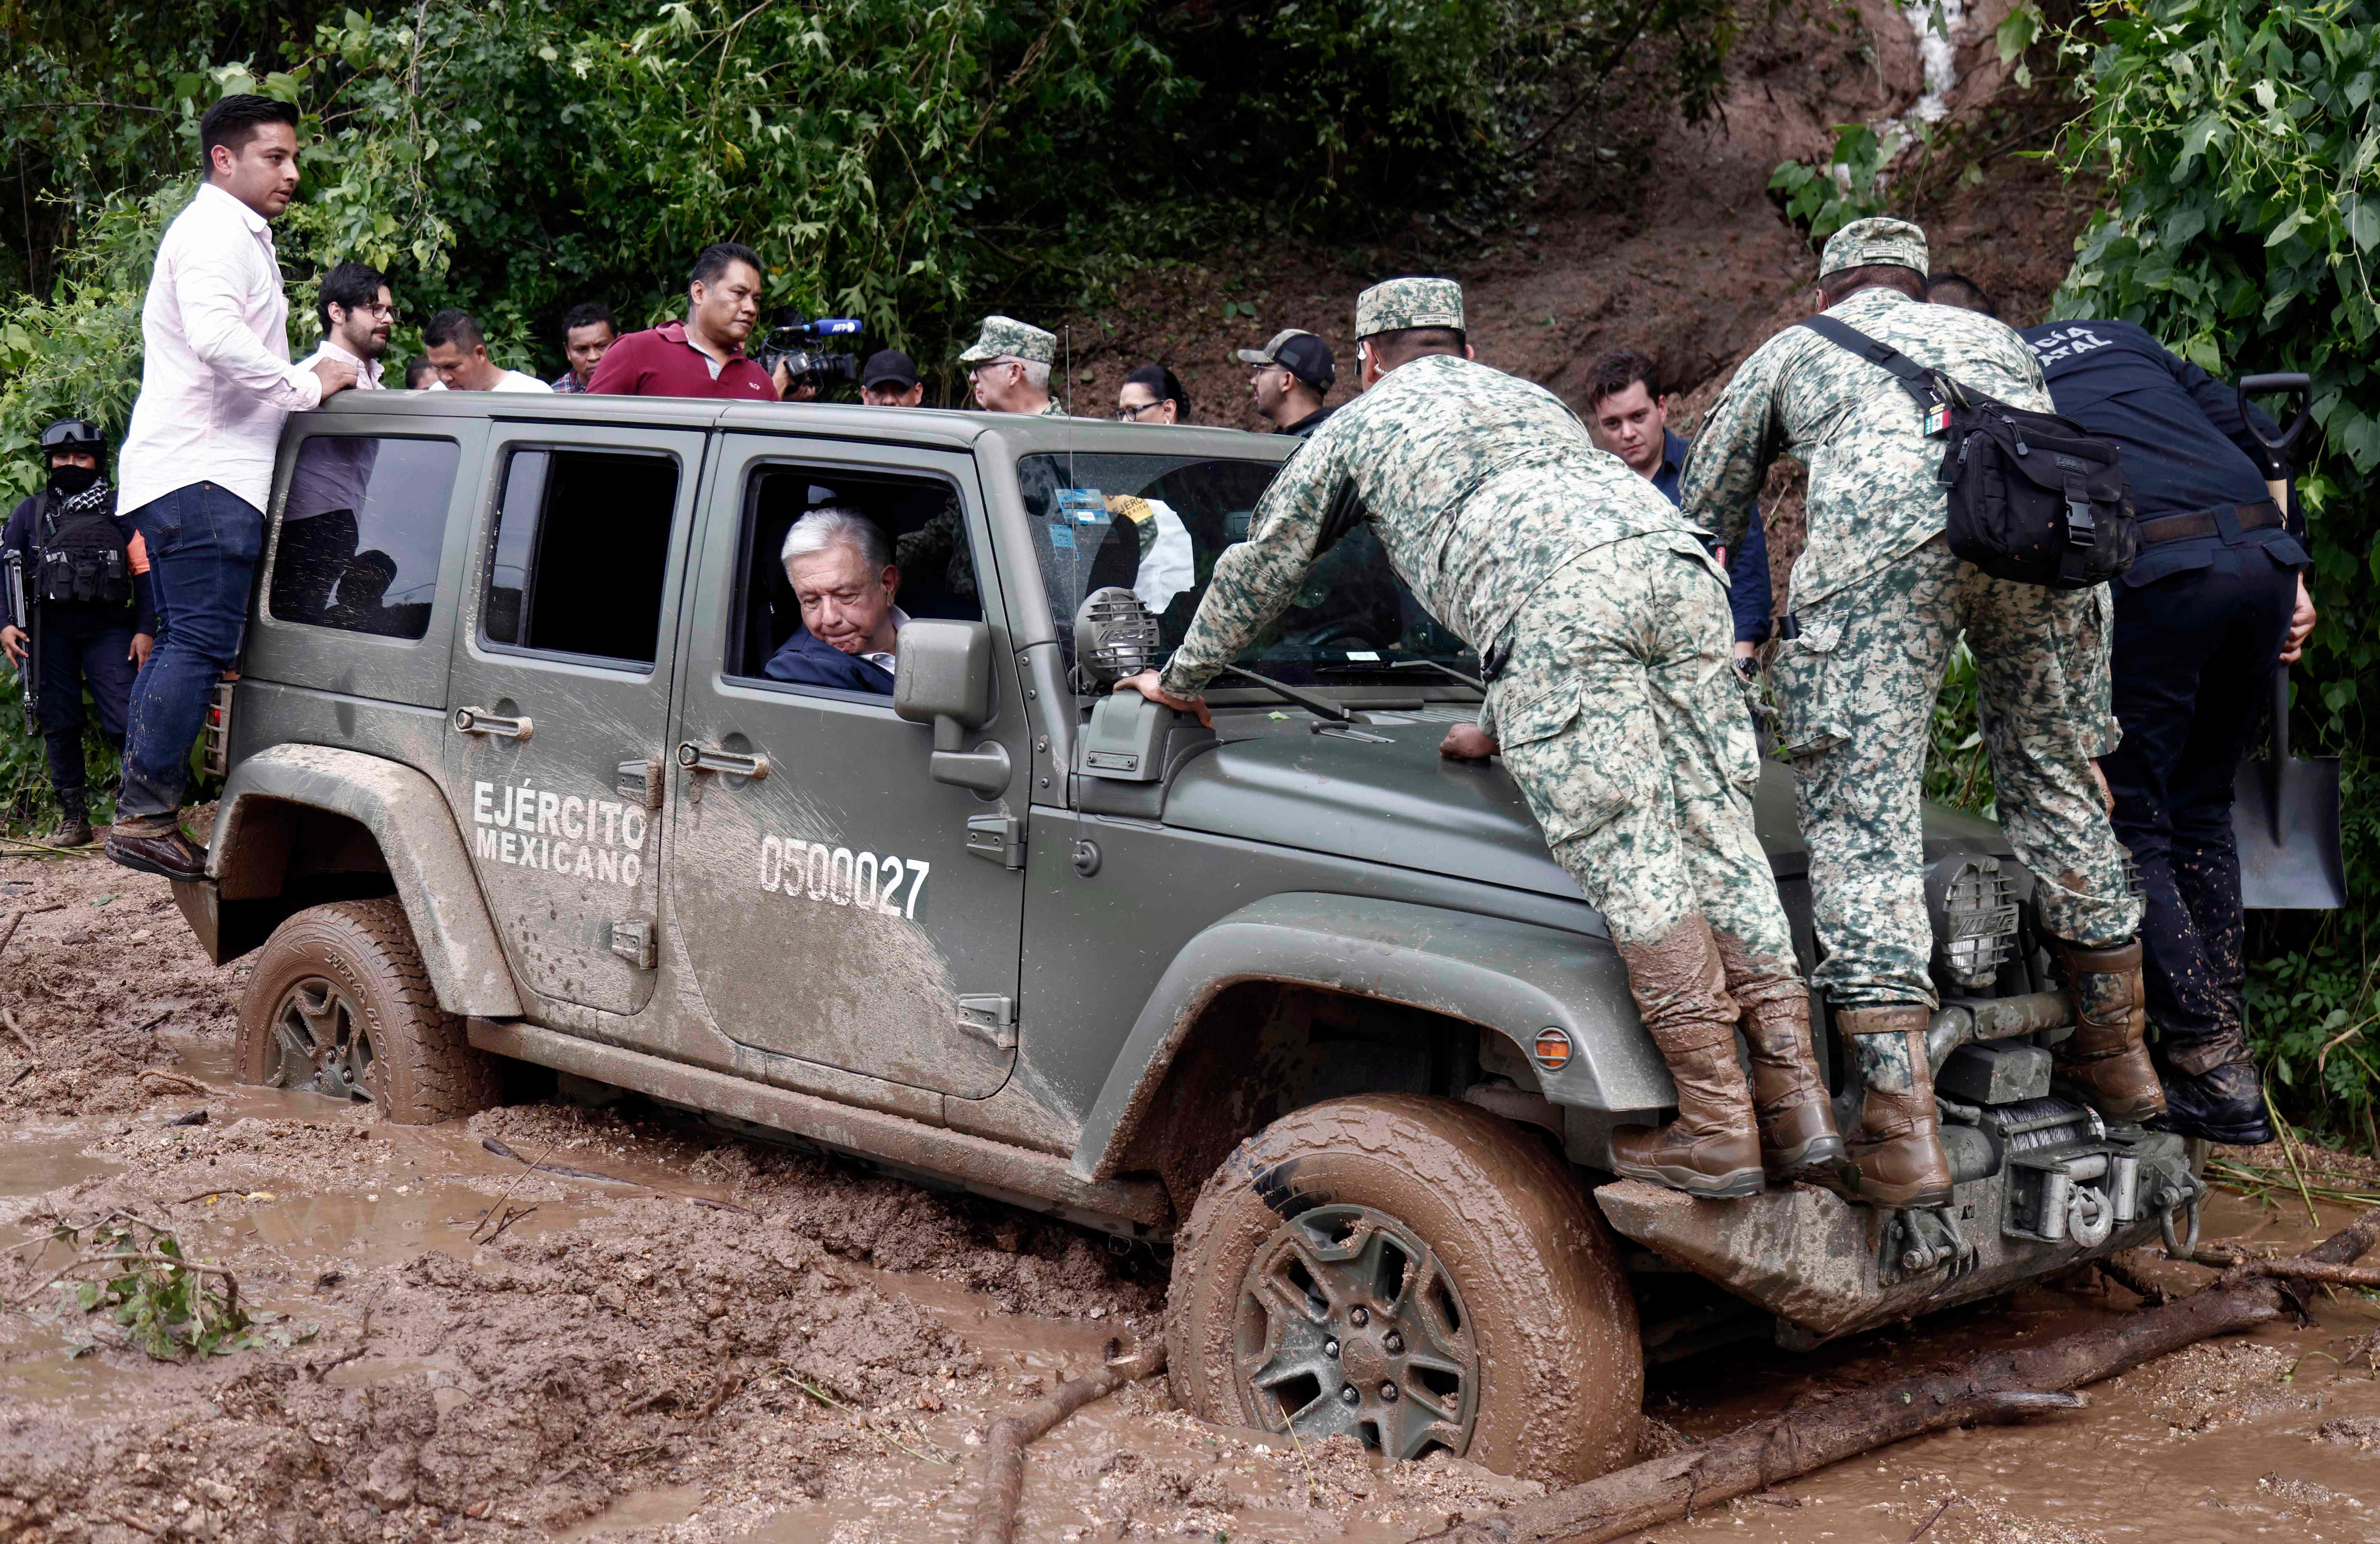 Mexican President Andres Manuel Lopez Obrador’s vehicle is stuck in mud during a visit to the Kilometro 42 community, near Acapulco, Guerrero State, Mexico, after Hurricane Otis, on October 25